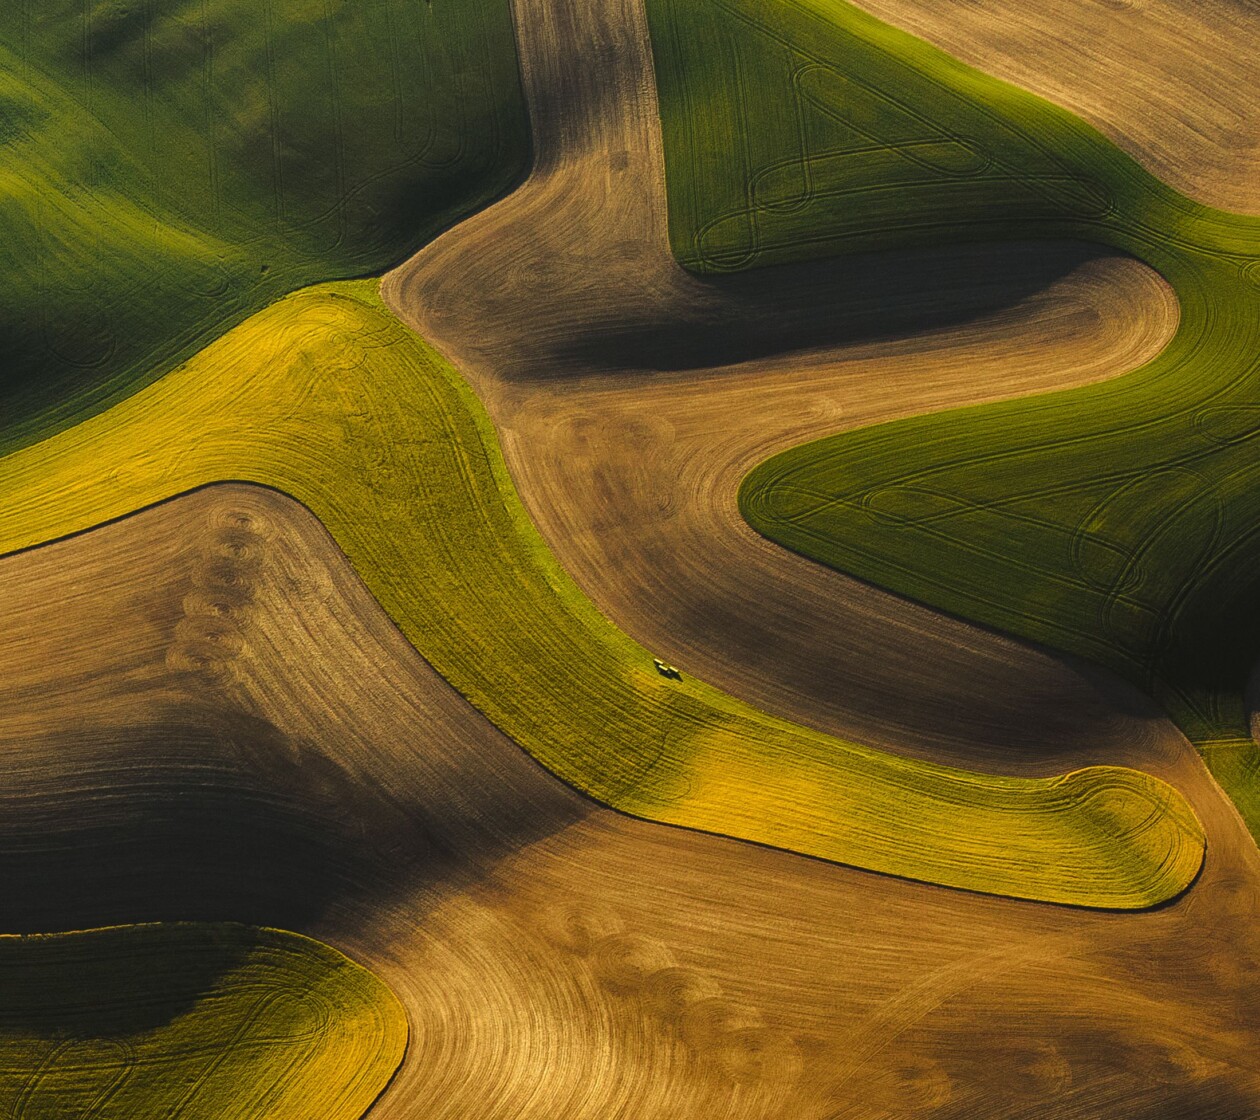 Eastern Washington, An Awe Inspiring Aerial Photography Series By Mitchell Rouse (7)